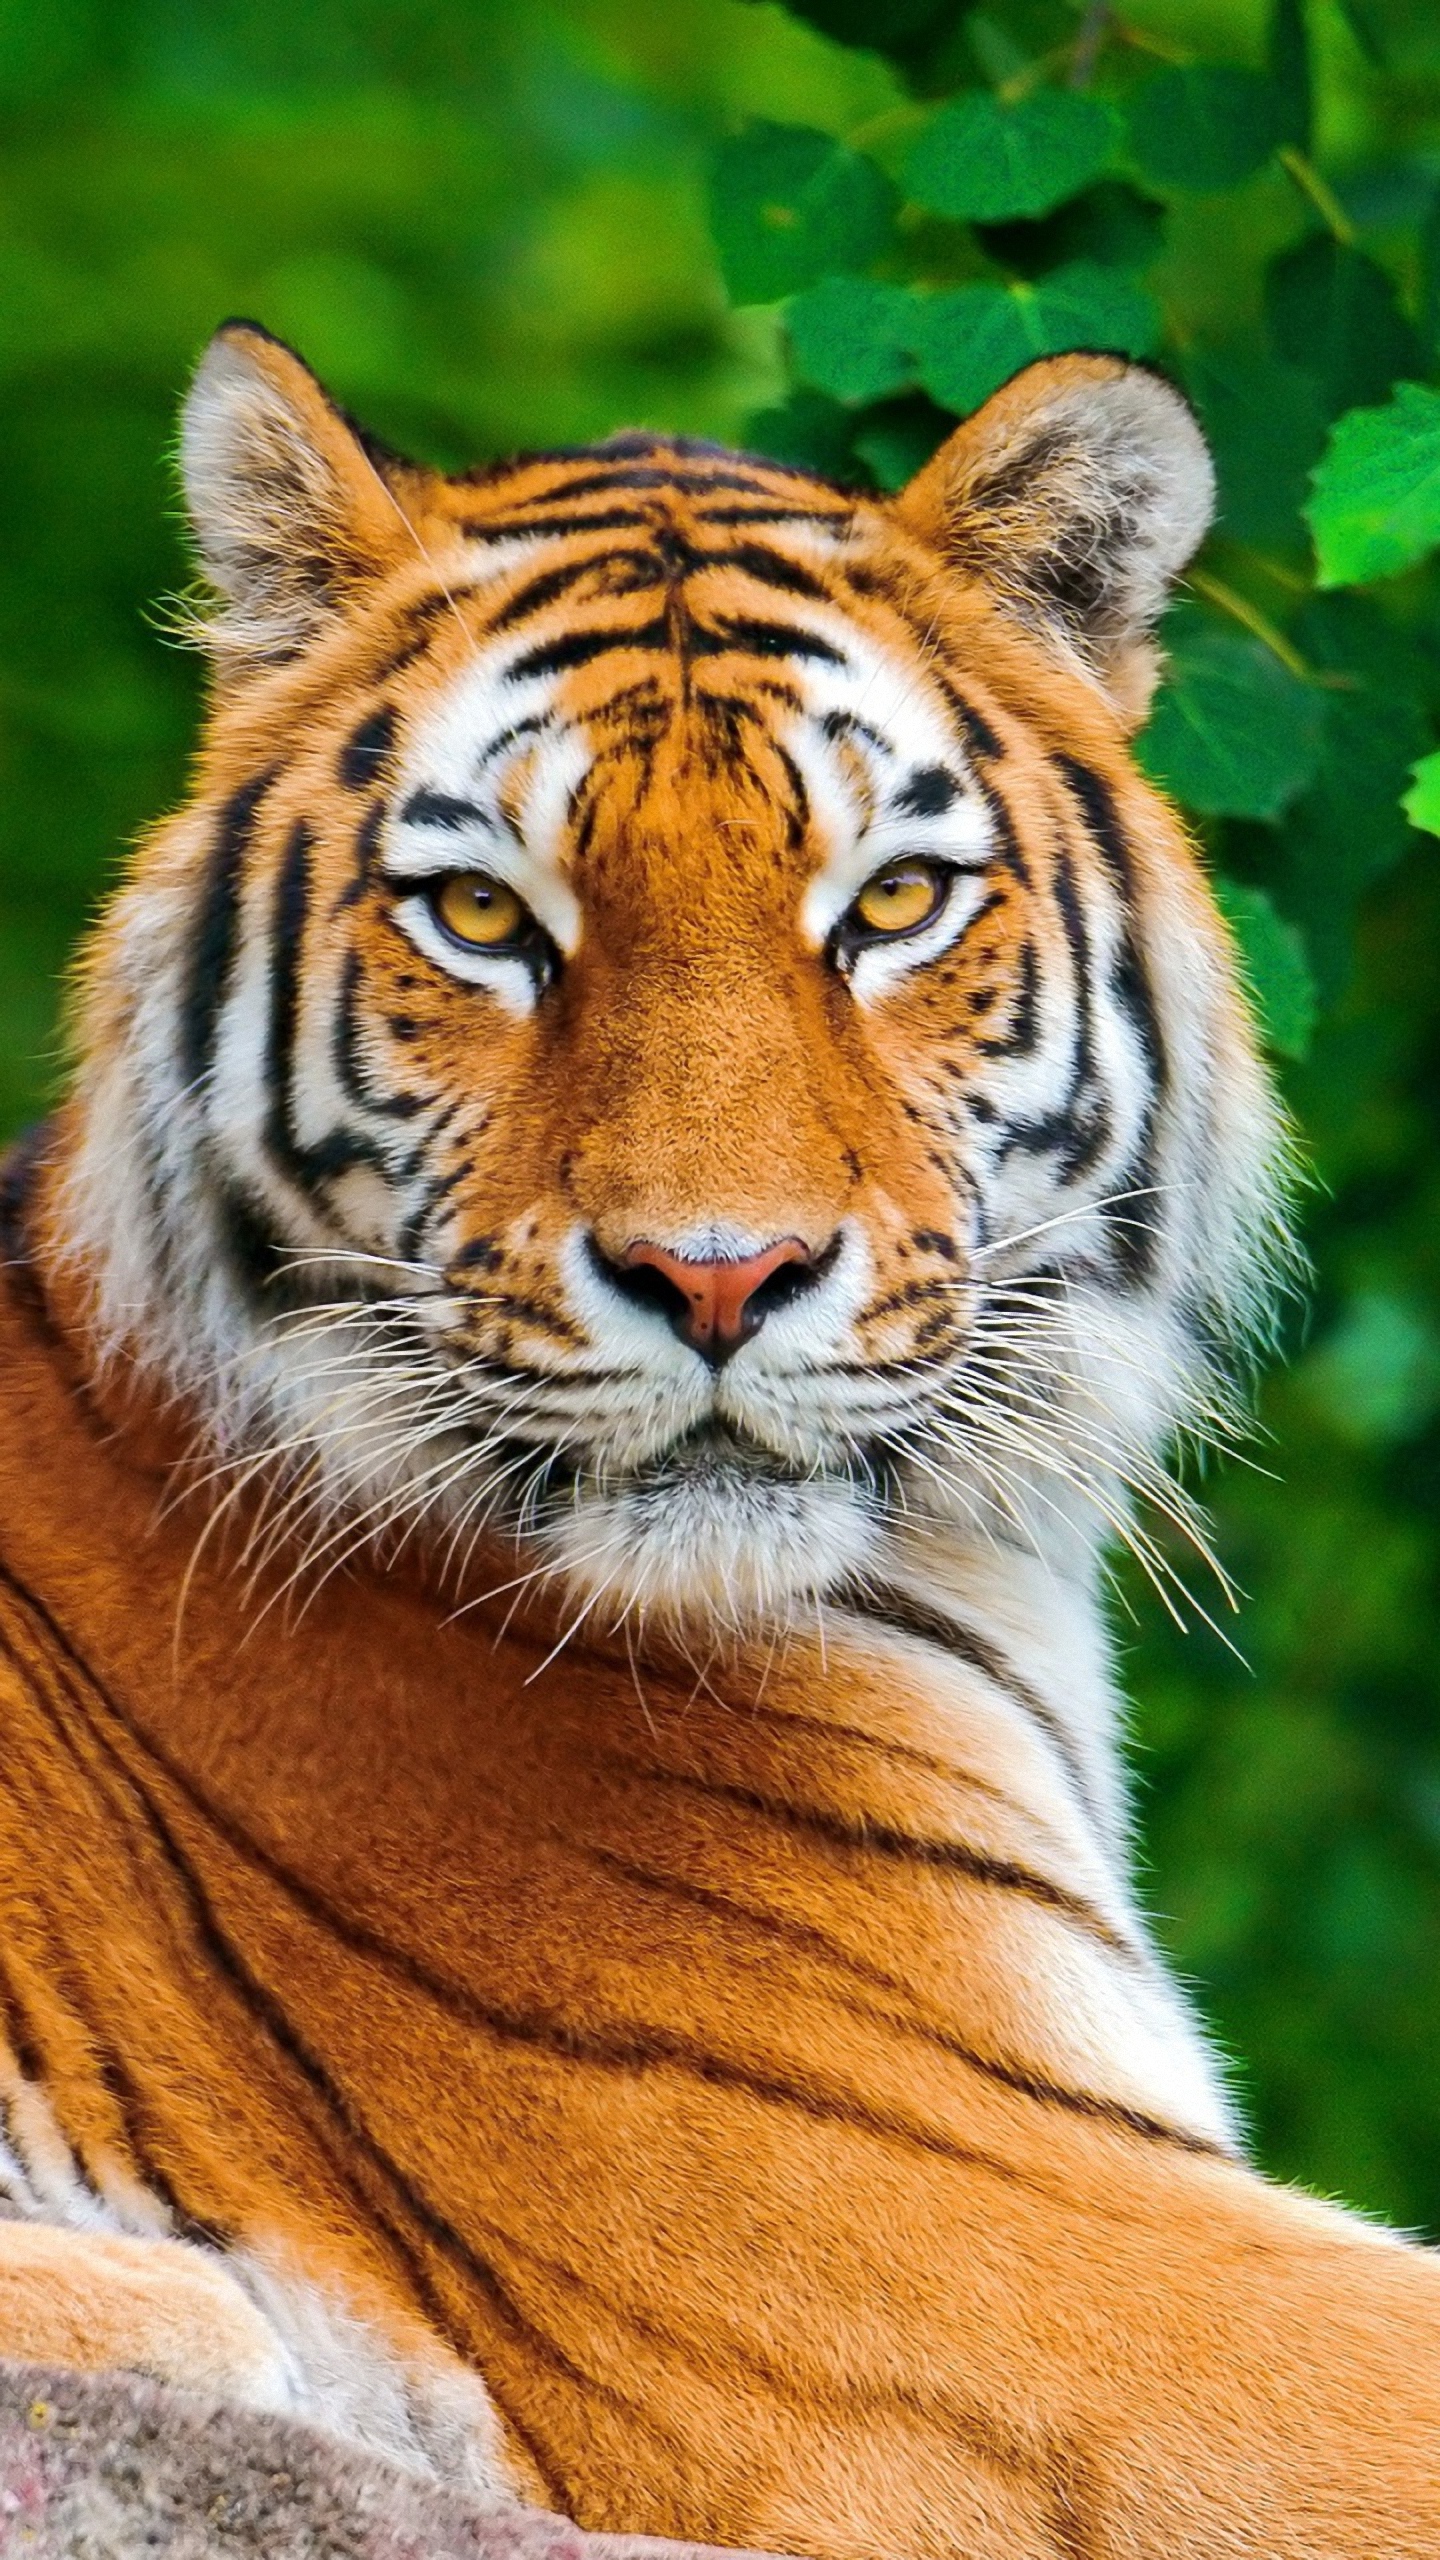 Tiger #536353 | HD Wallpapers pack download free